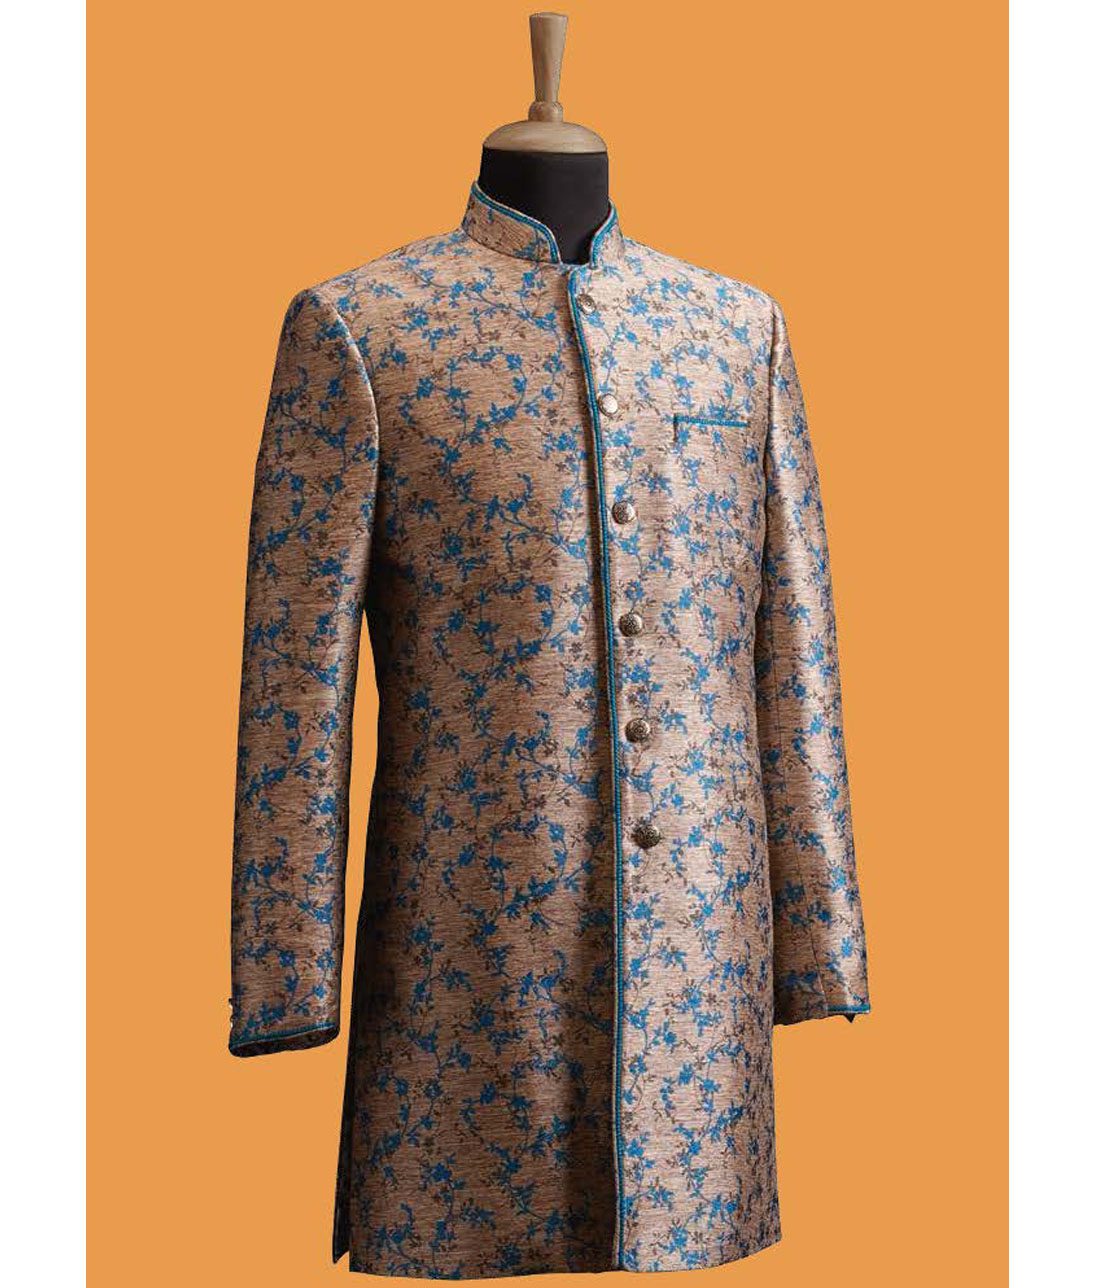 Nemesis Beige & Firozi Blue Floral Jacquard Unstitched Terry Rayon Blazer or Bandhgala Fabric